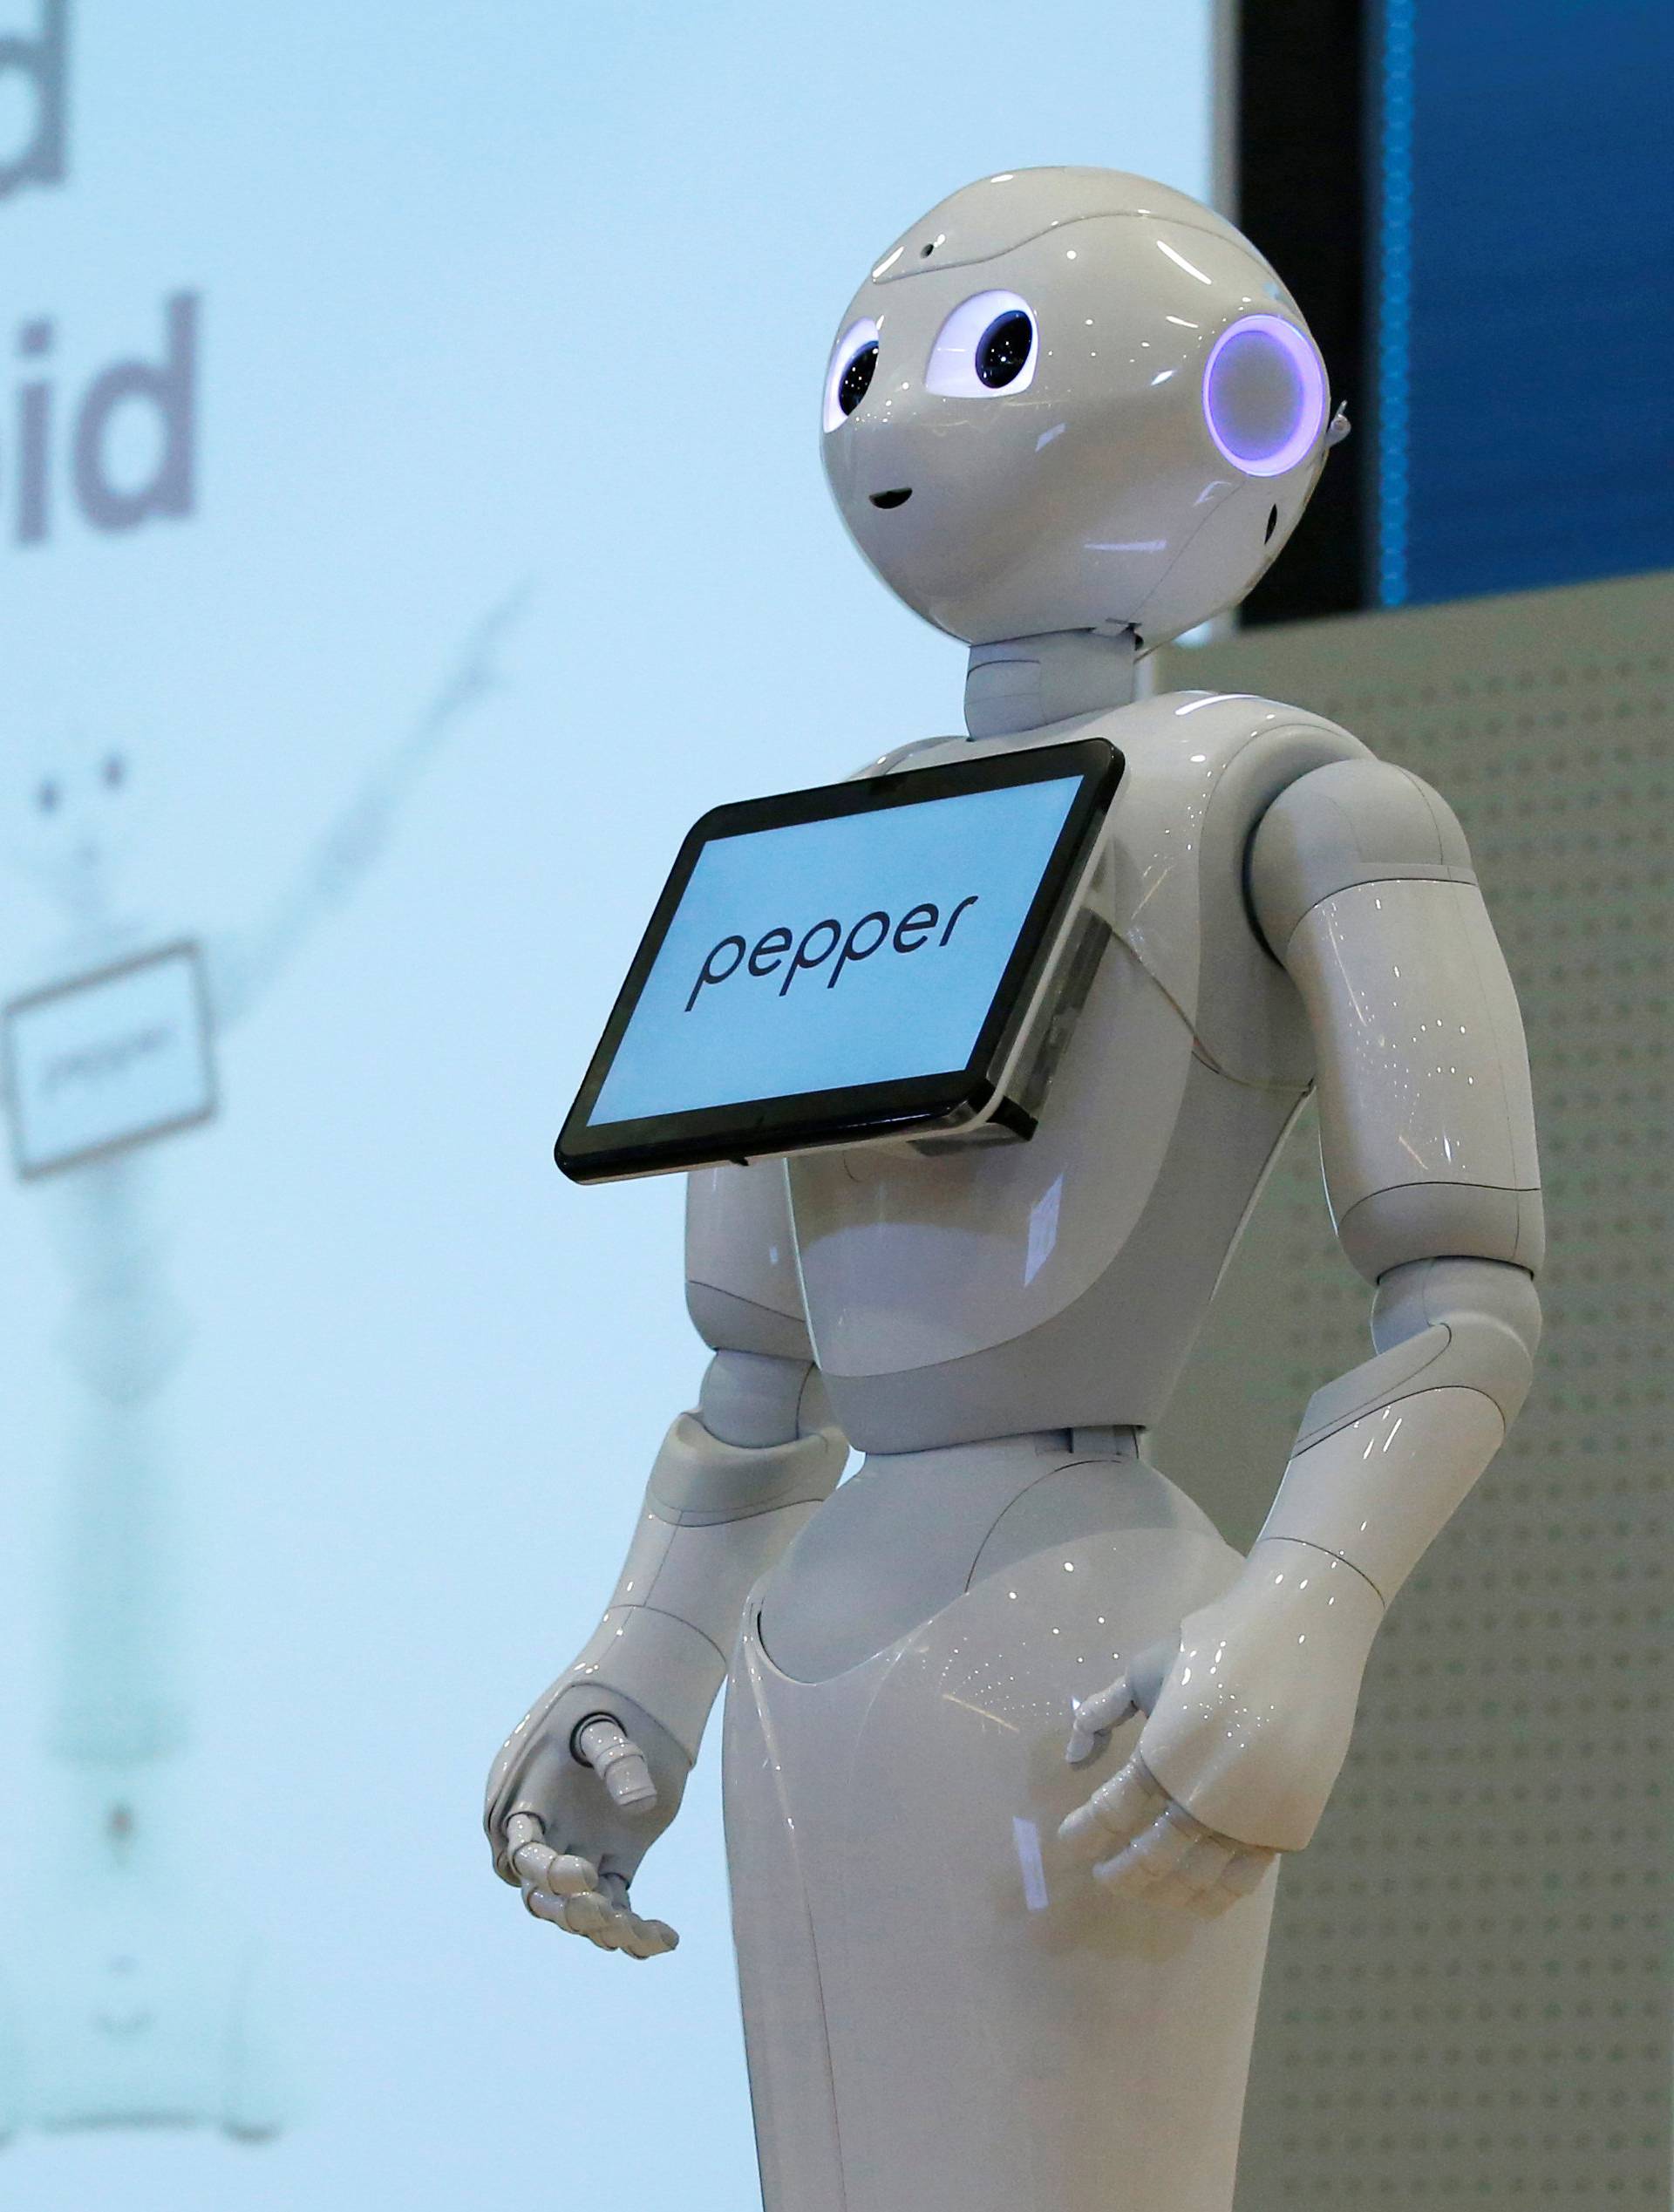 SoftBank's emotion-reading robot Pepper is seen during a demonstration at the company's headquarters in Tokyo